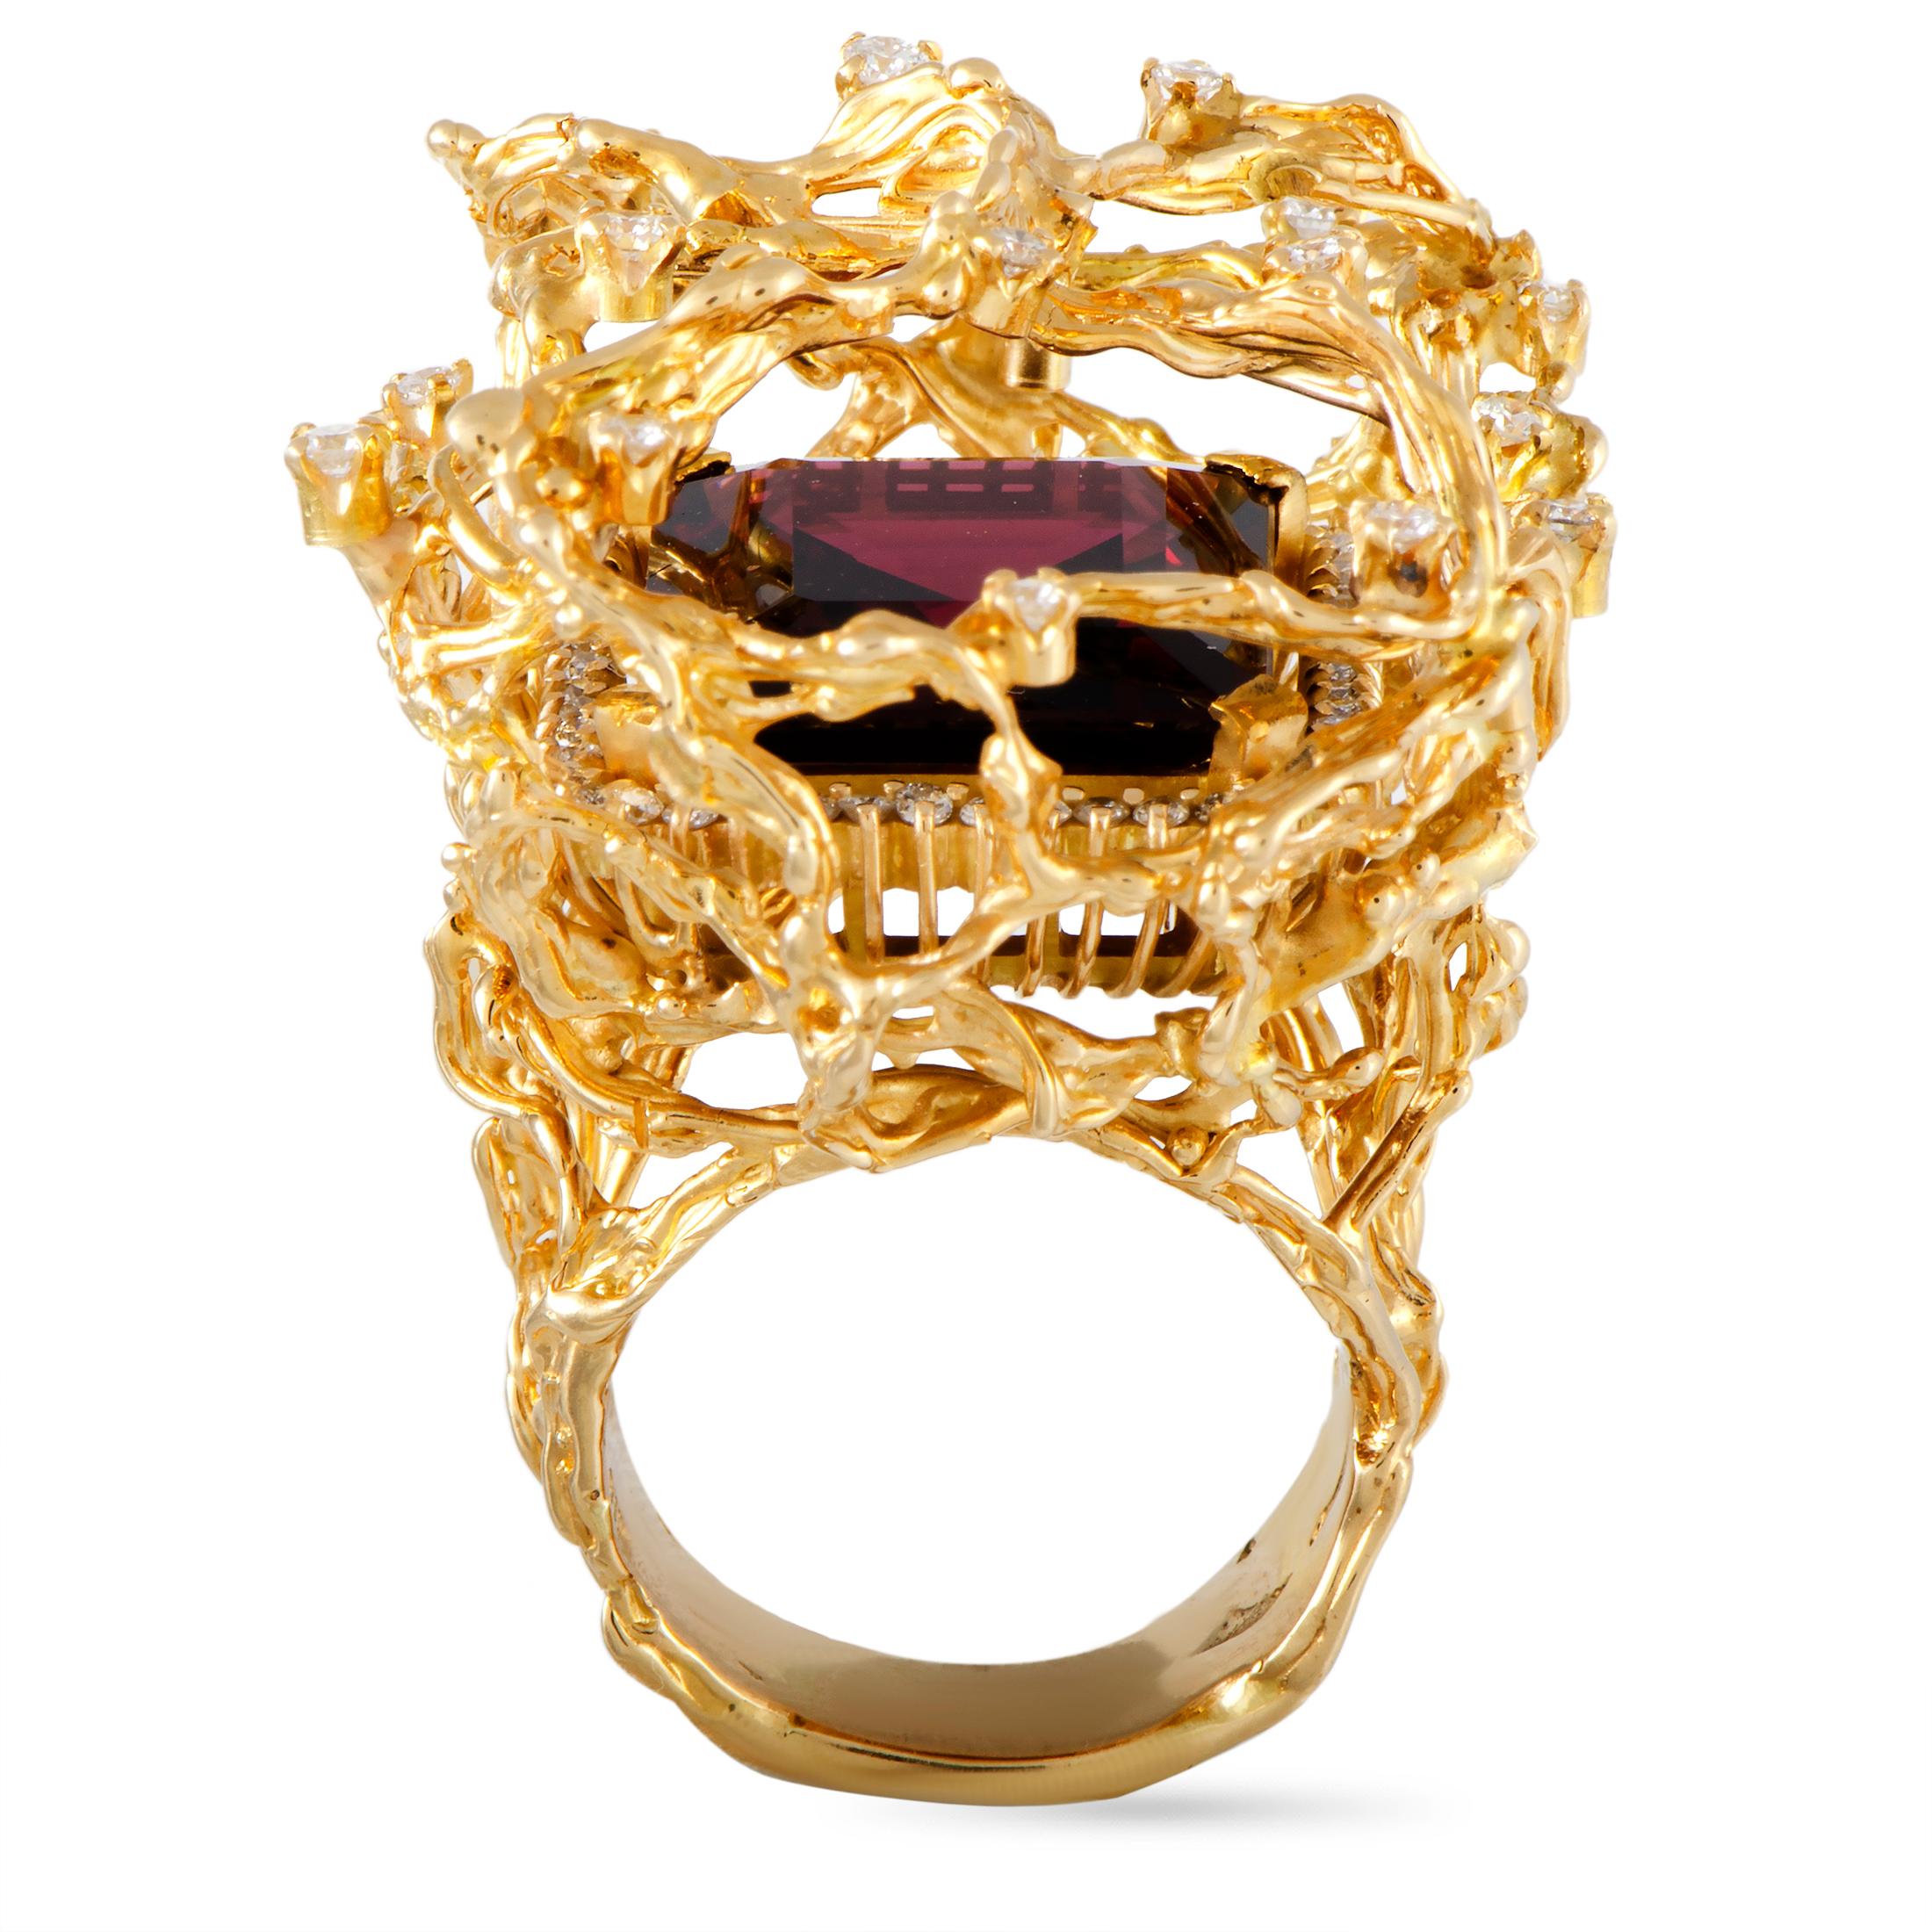 This LB Exclusive ring is crafted from 18K yellow gold and set with a rhodolite that weighs 22.27 carats and a total of 1.25 carats of diamonds. The ring weighs 34.1 grams, boasting band thickness of 8 mm and top height of 23 mm, while top